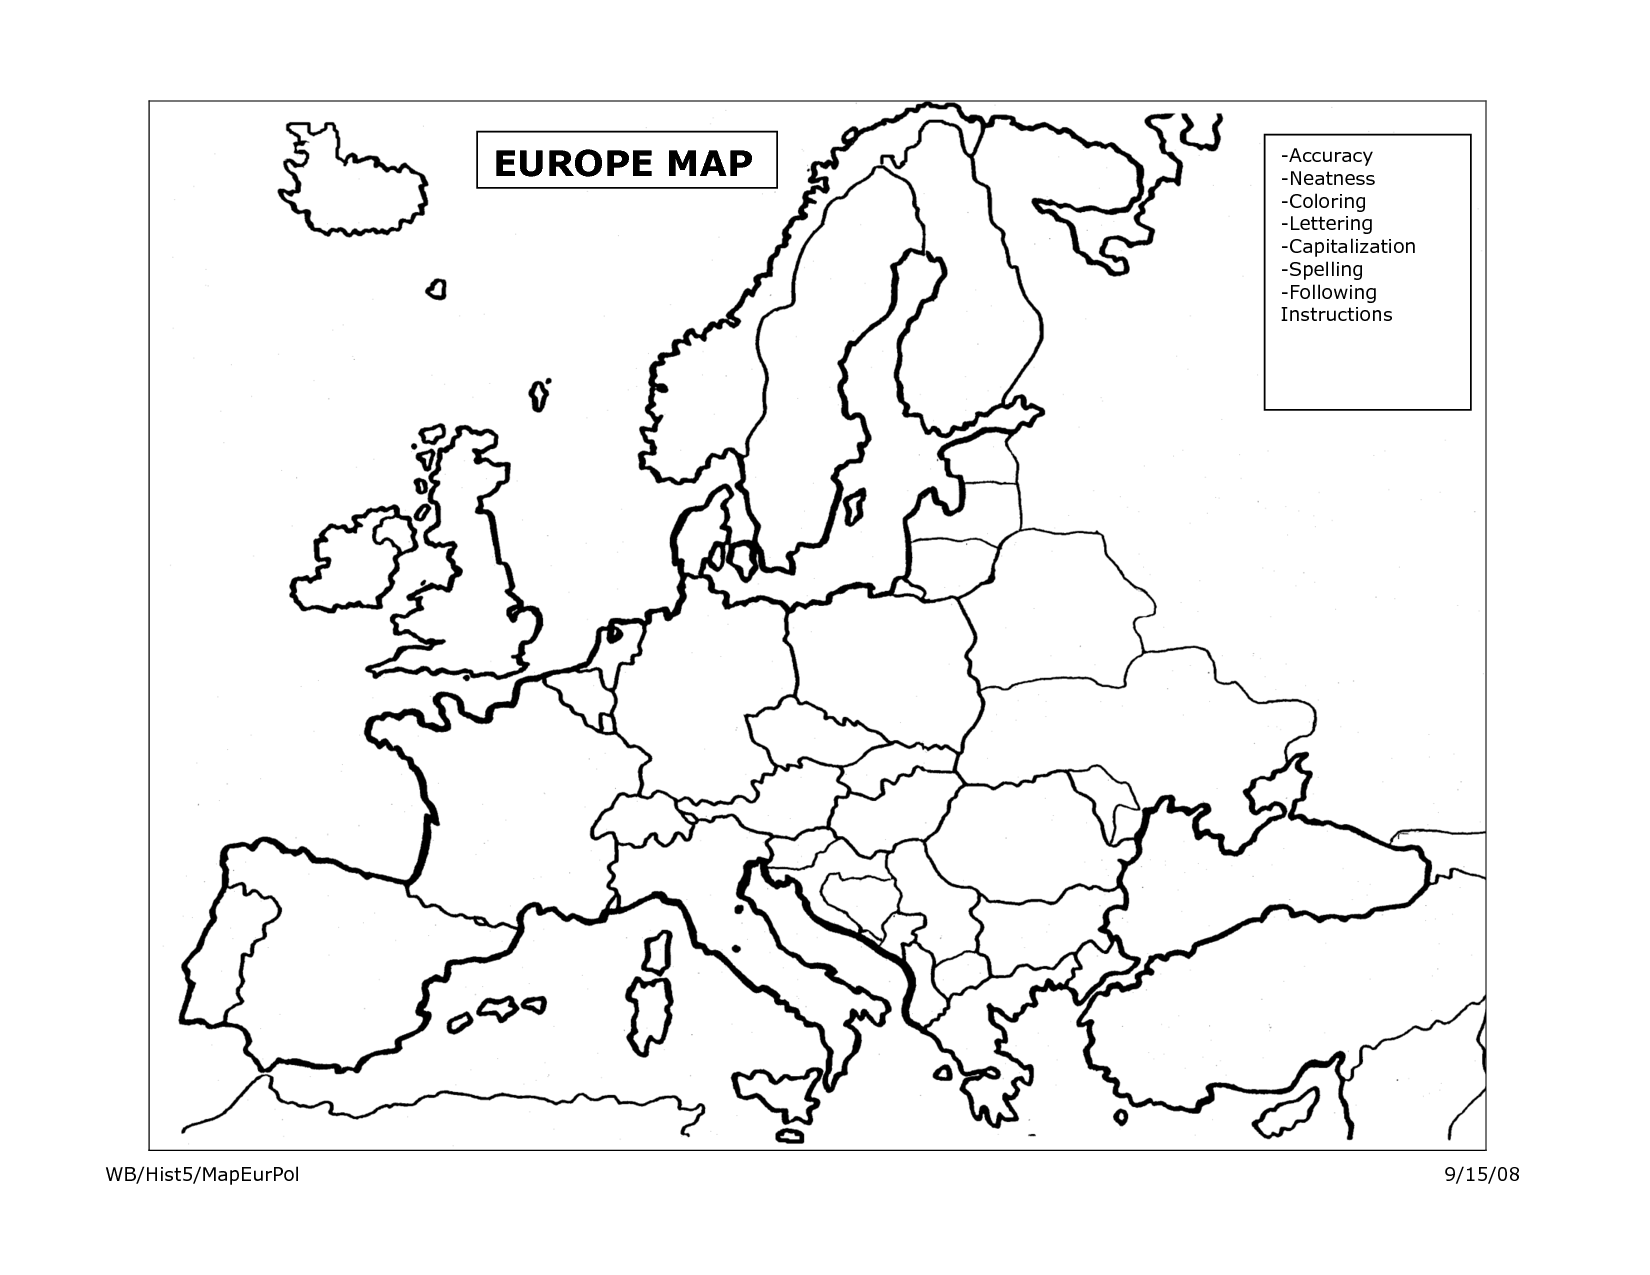 free-europe-map-coloring-pages-download-free-europe-map-coloring-pages